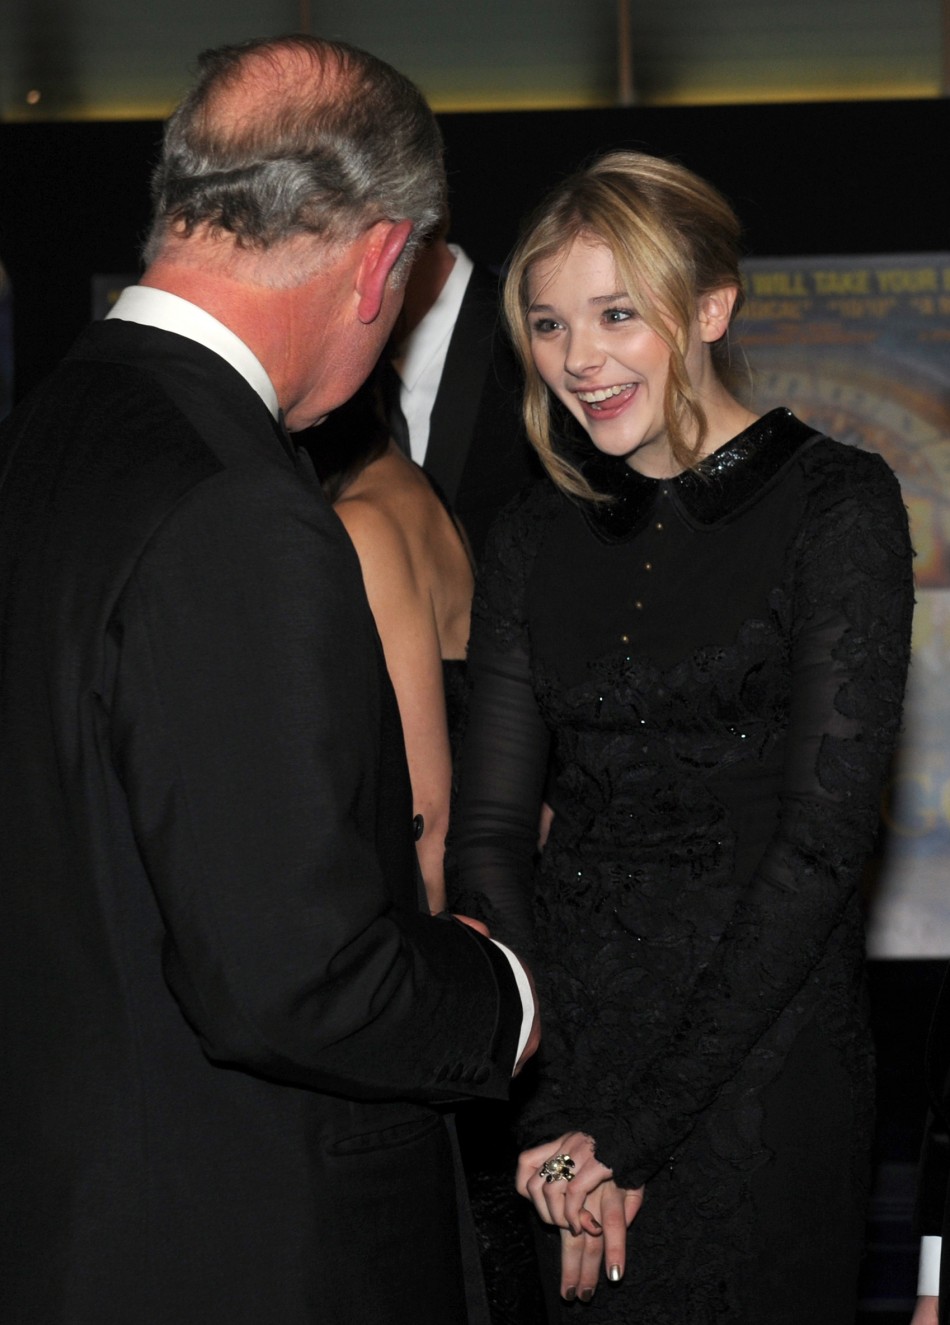 Britain039s Prince Charles meets actor Chloe Moretz as they attendThe Royal Premiere of director Martin Scorsese039s film Hugo at the Odeon Leicester Square cinema in London